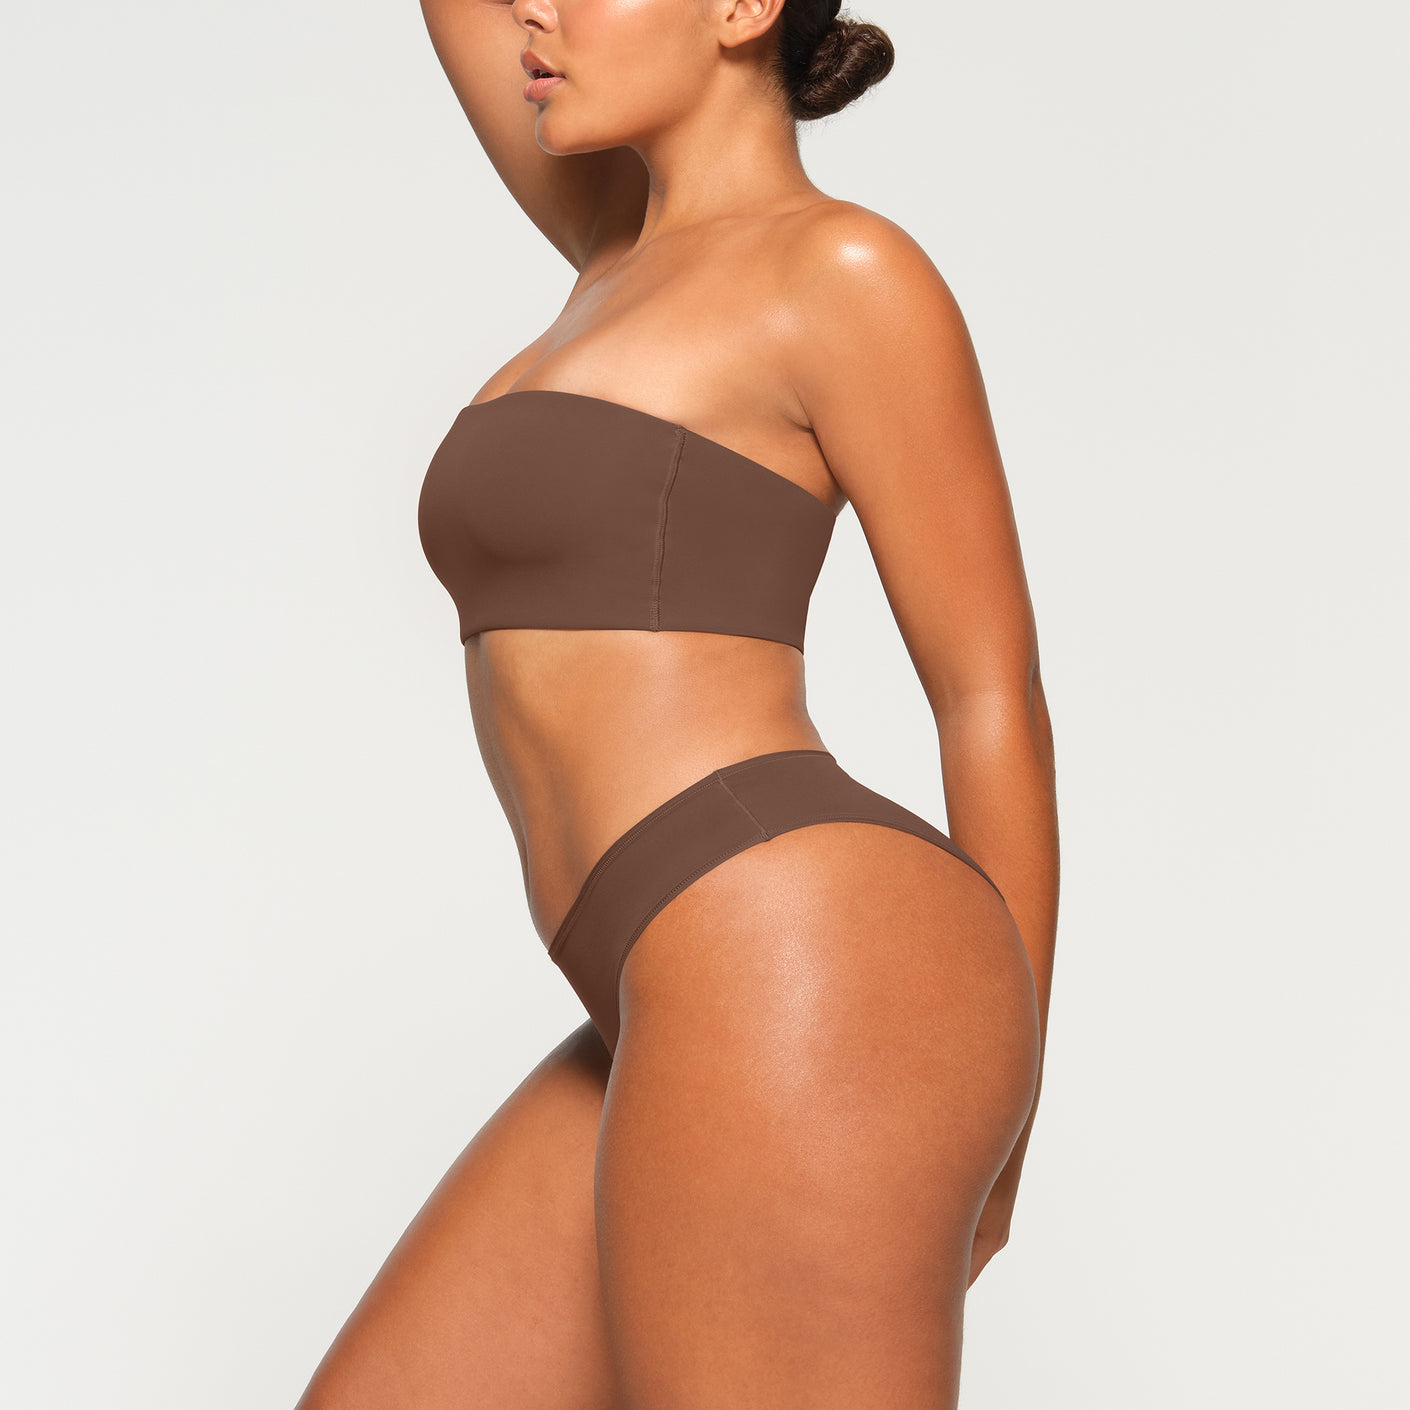 SKIMS Fits Everybody Bandeau S NWT Tan - $23 (36% Off Retail) New With Tags  - From Ali